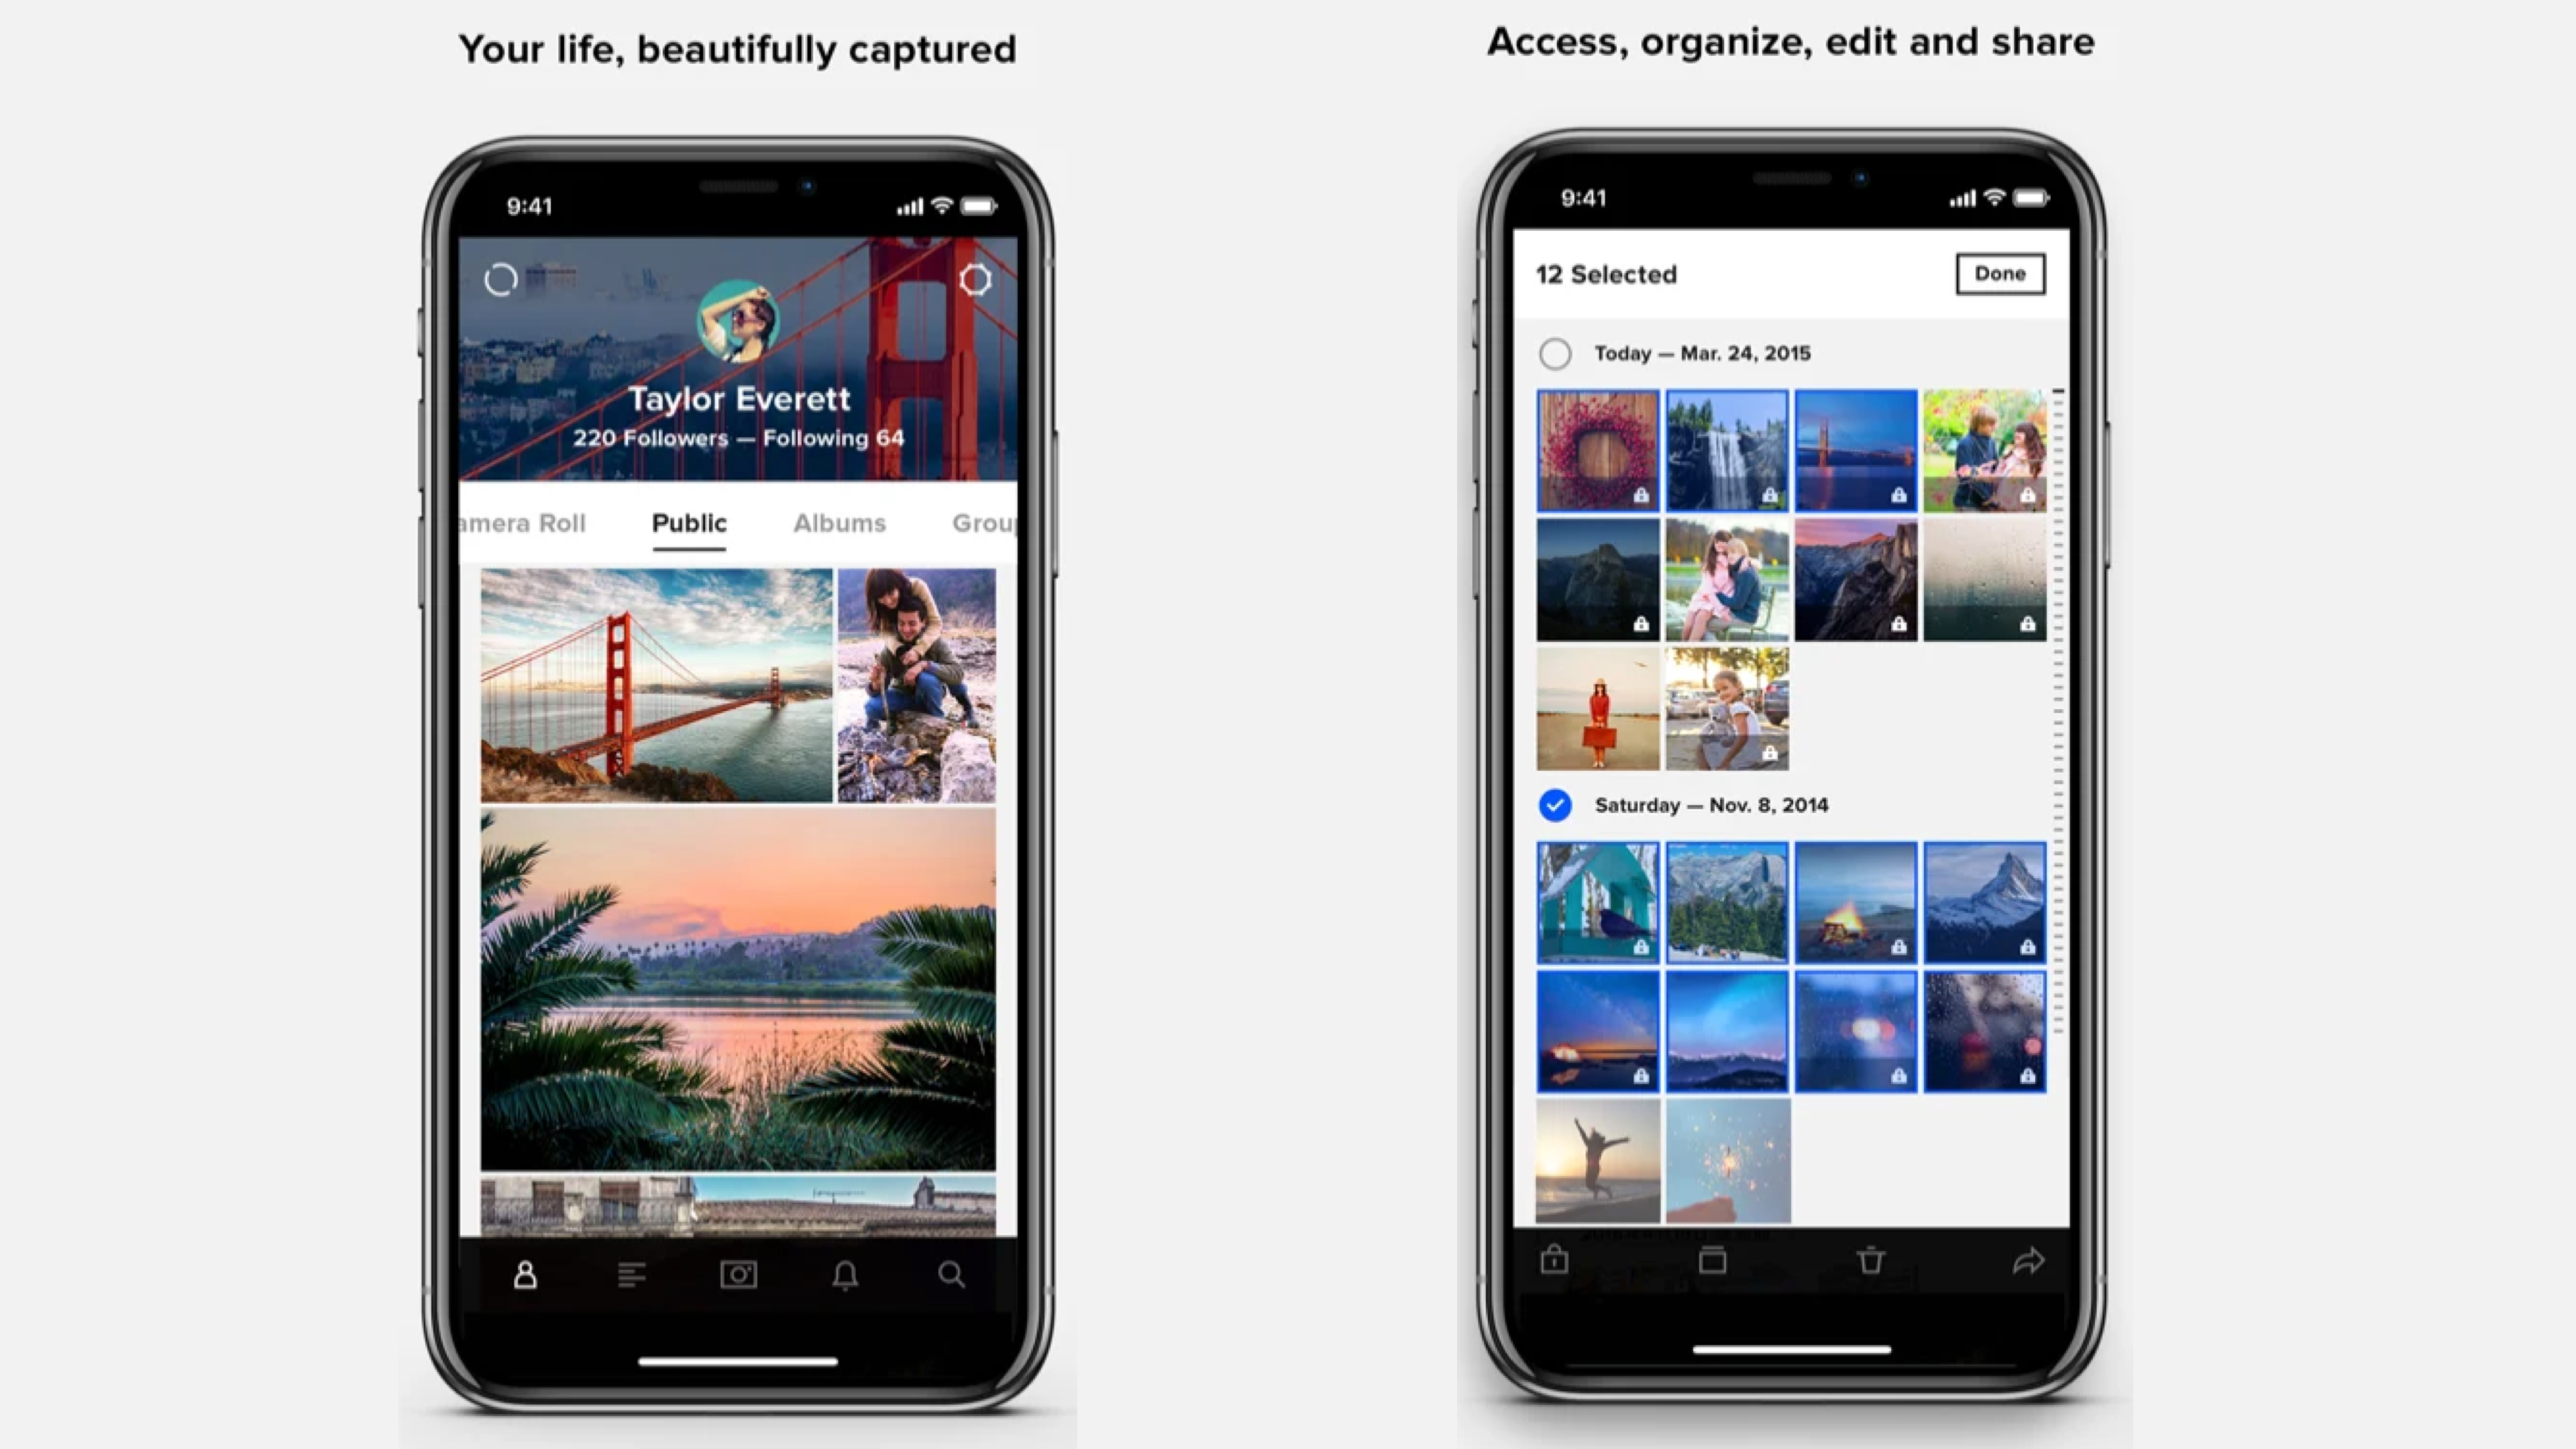 flickr photo storage app for your phone